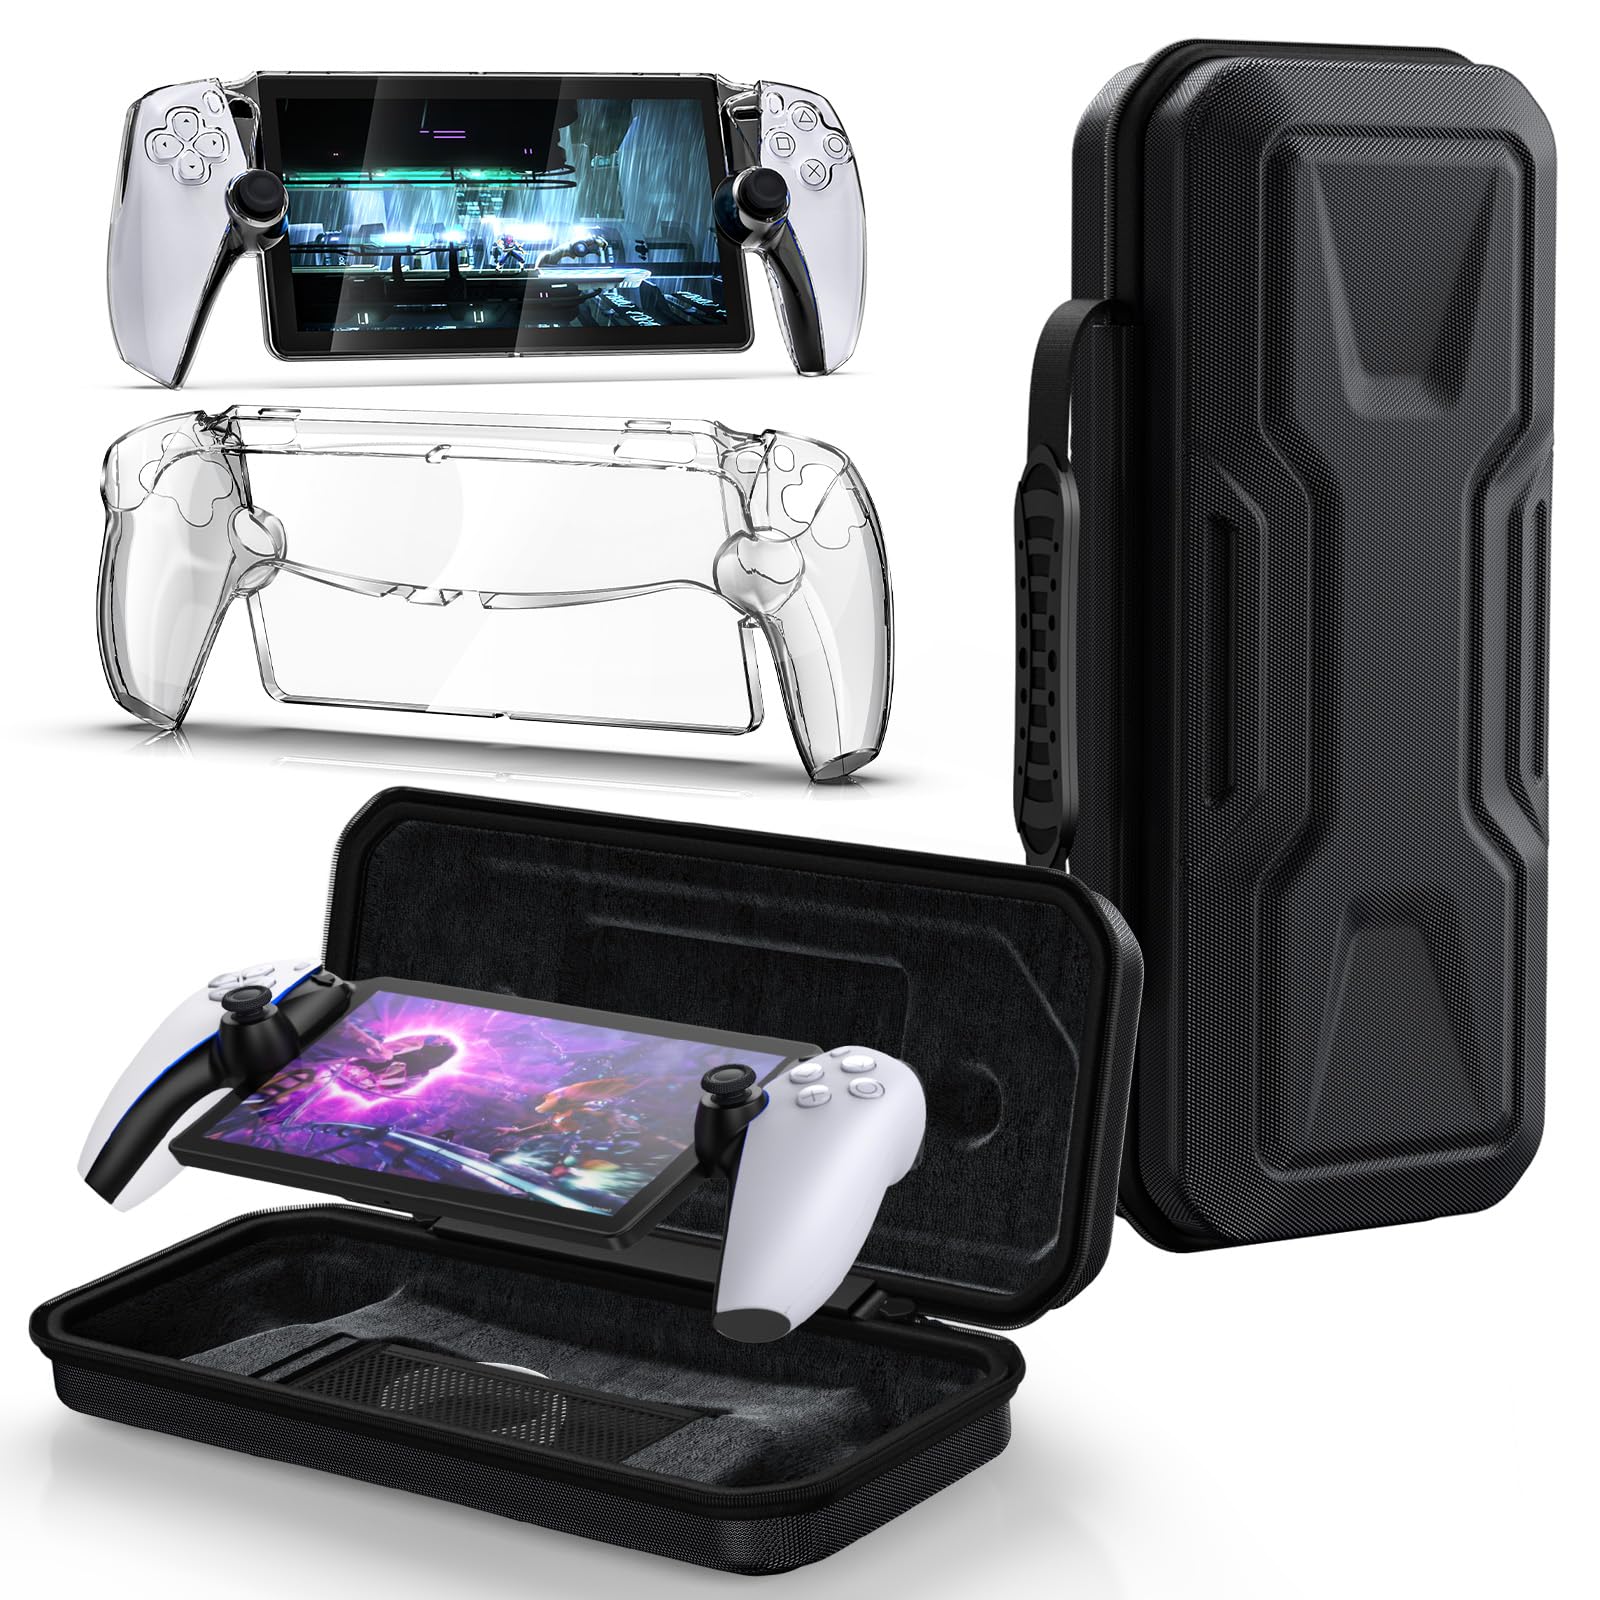 Klipdasse Protective Case and Carrying Case for Playstation Portal Accessories